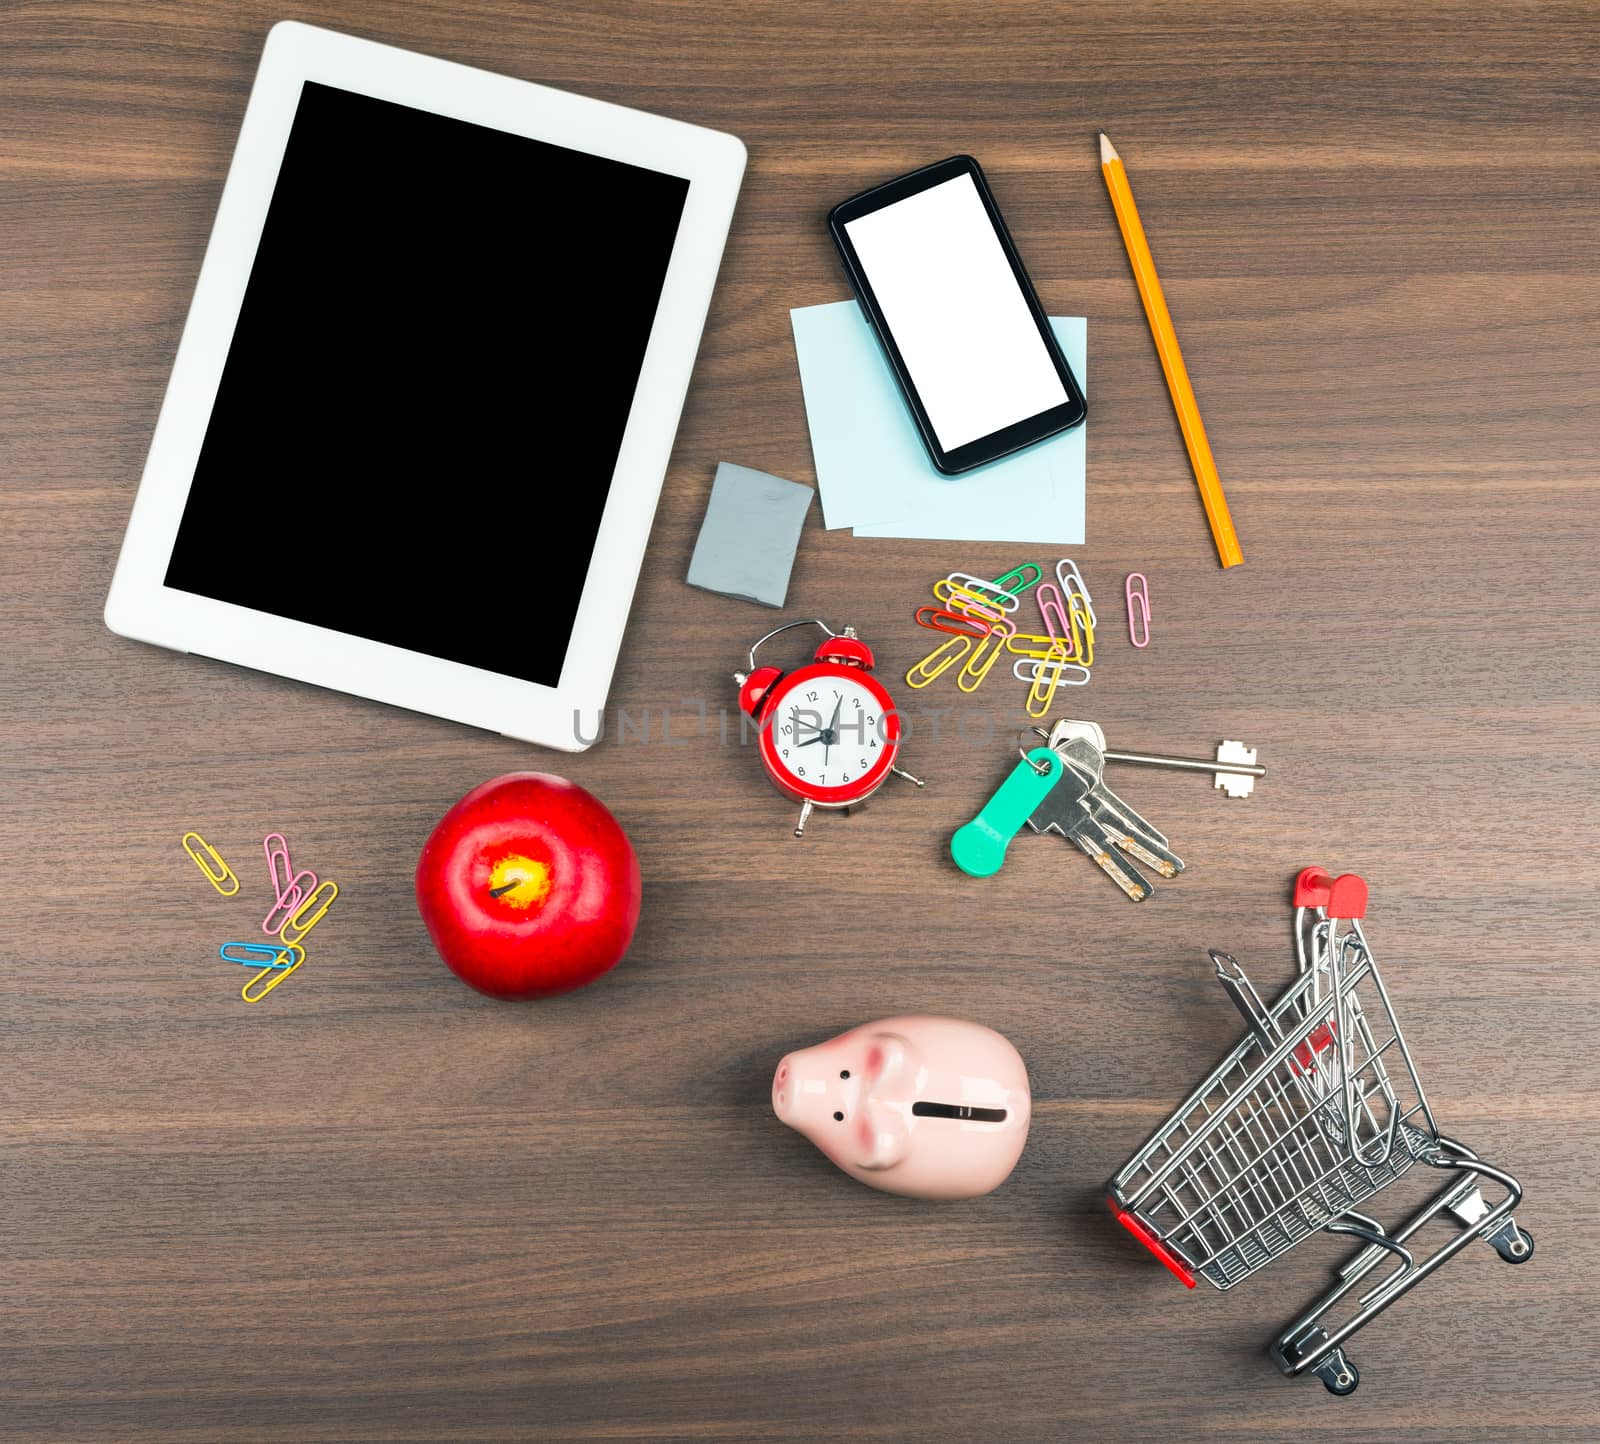 Shopping cart with office supplies and tablet on wooden table